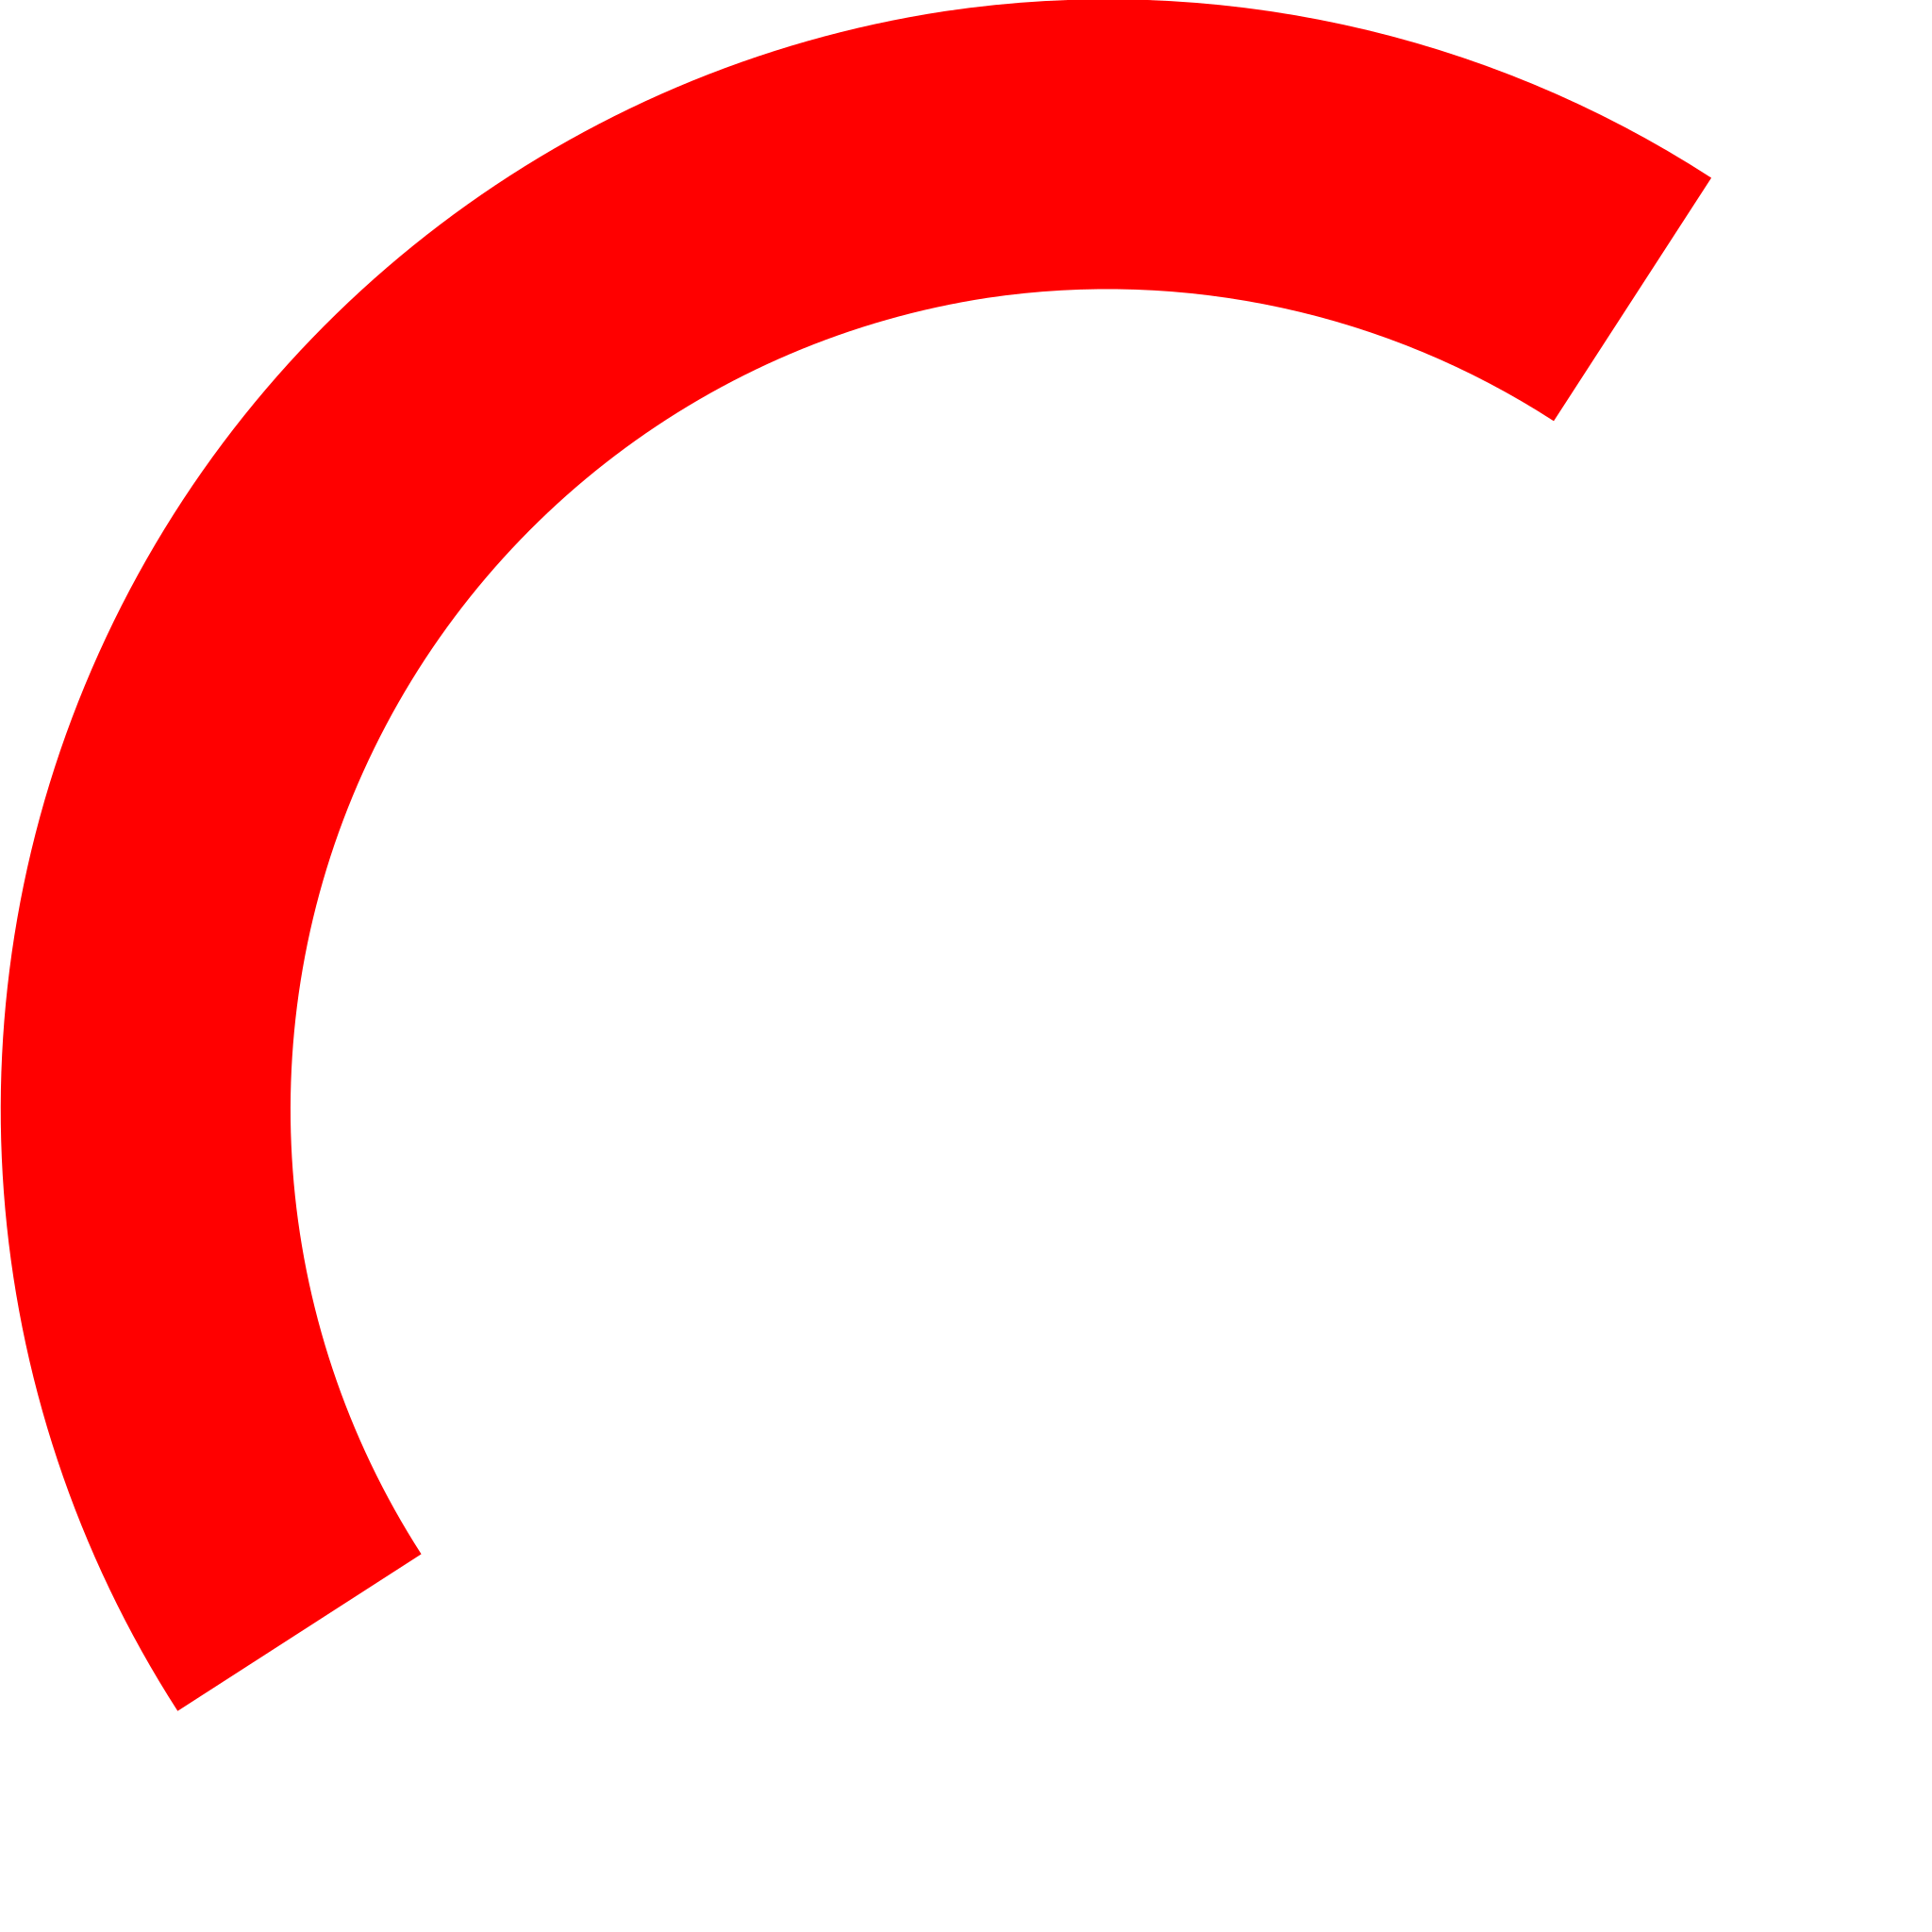 File:Arc Symbol 3px.png - Wikimedia Commons